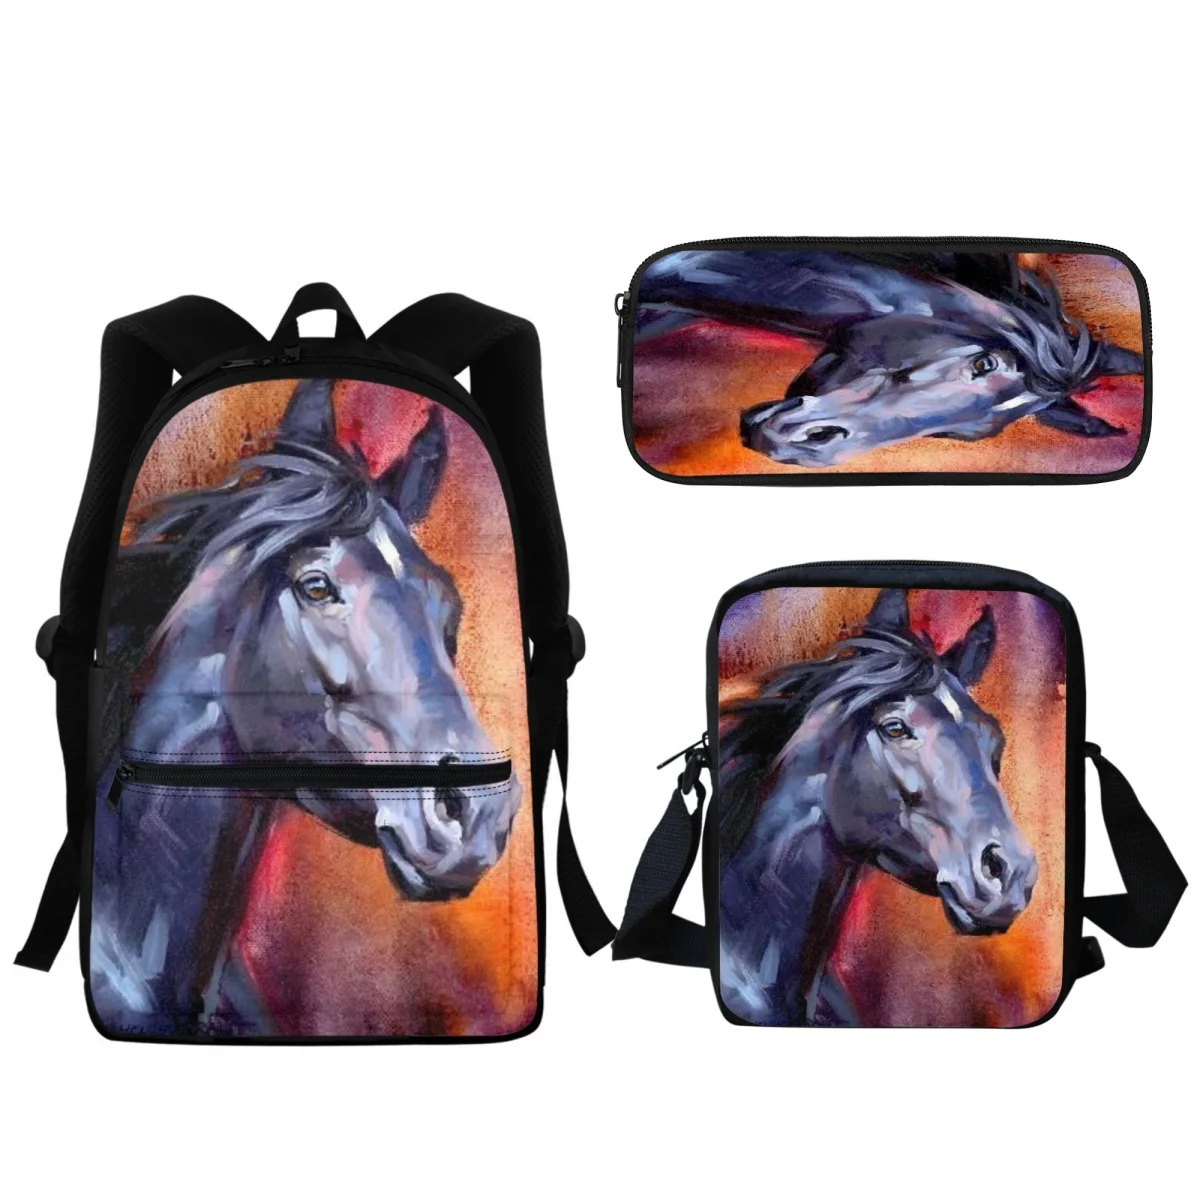 

3Pc Oil Painting Horse Pattern Student SchoolBags Boys Girls Fashion Backpack Kids Kindergarten School Bag Small Lunch Satchel